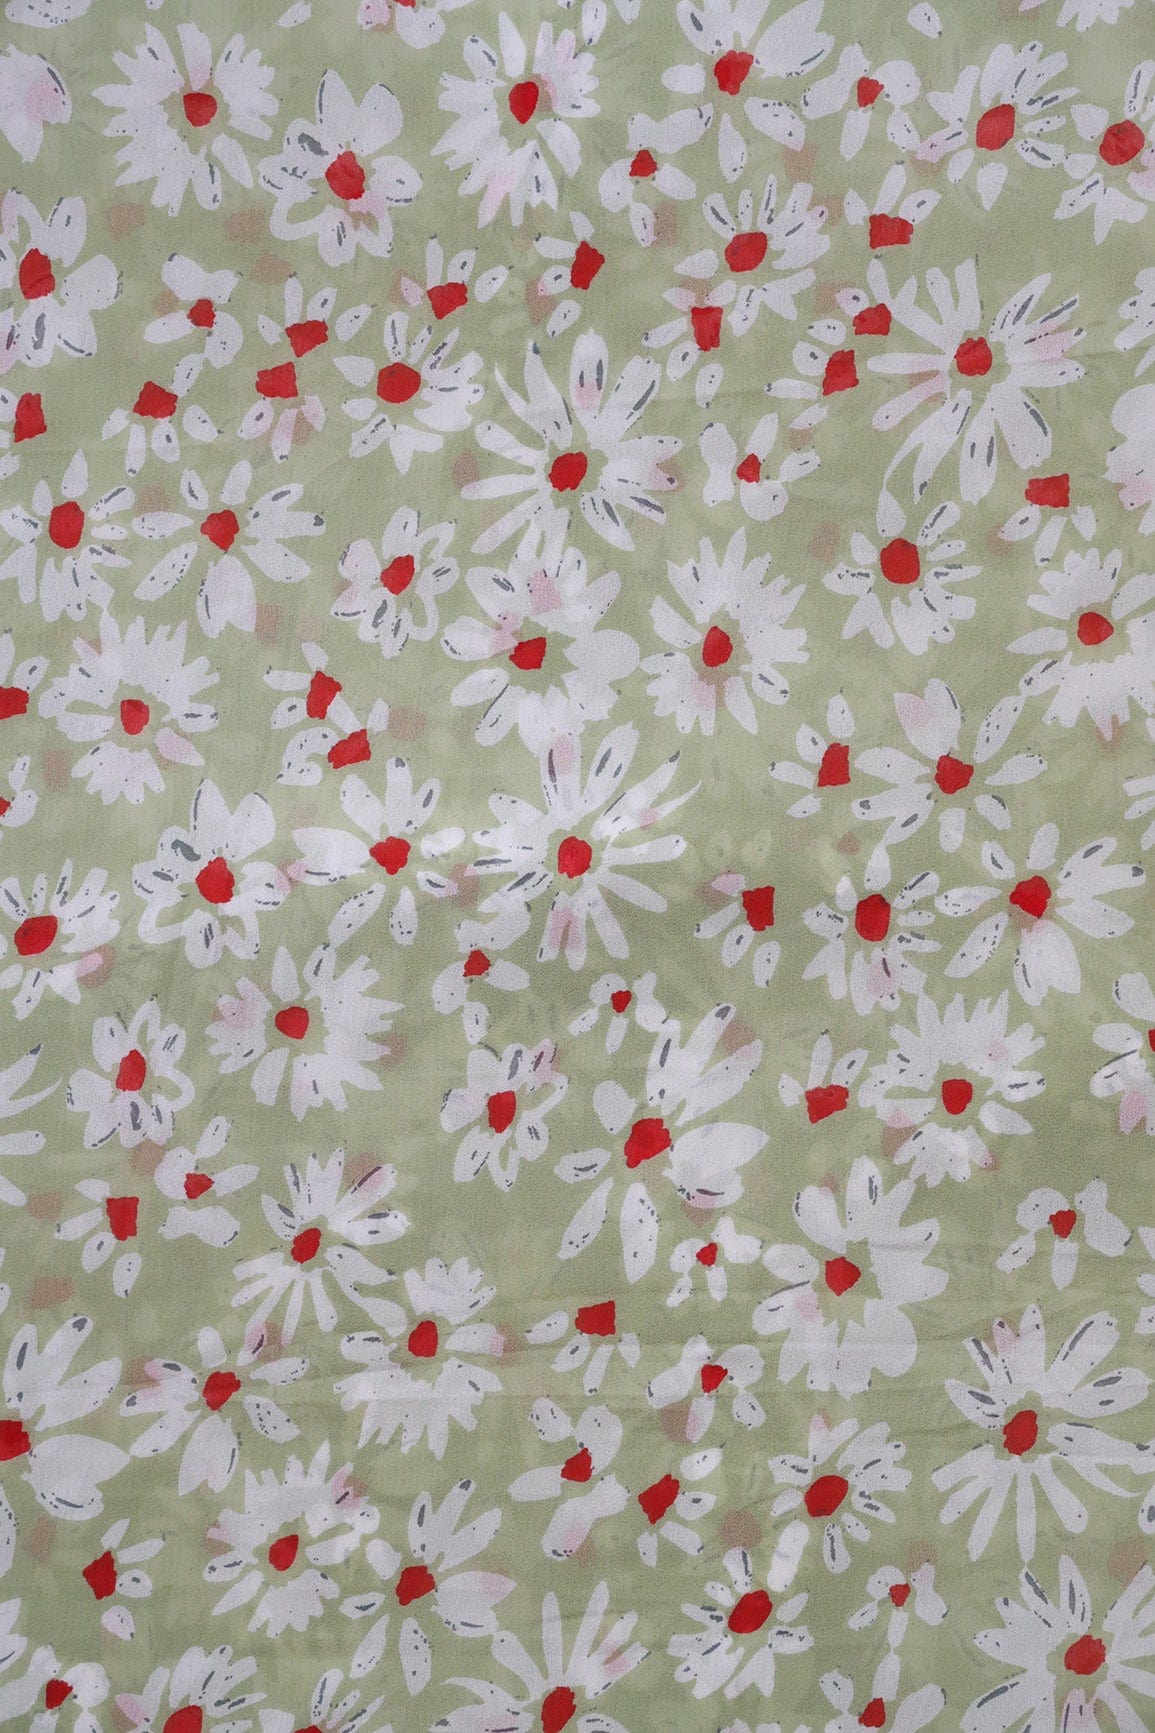 doeraa Prints Big Width "56" White And Red Floral Digital Print On Light Olive Georgette Fabric